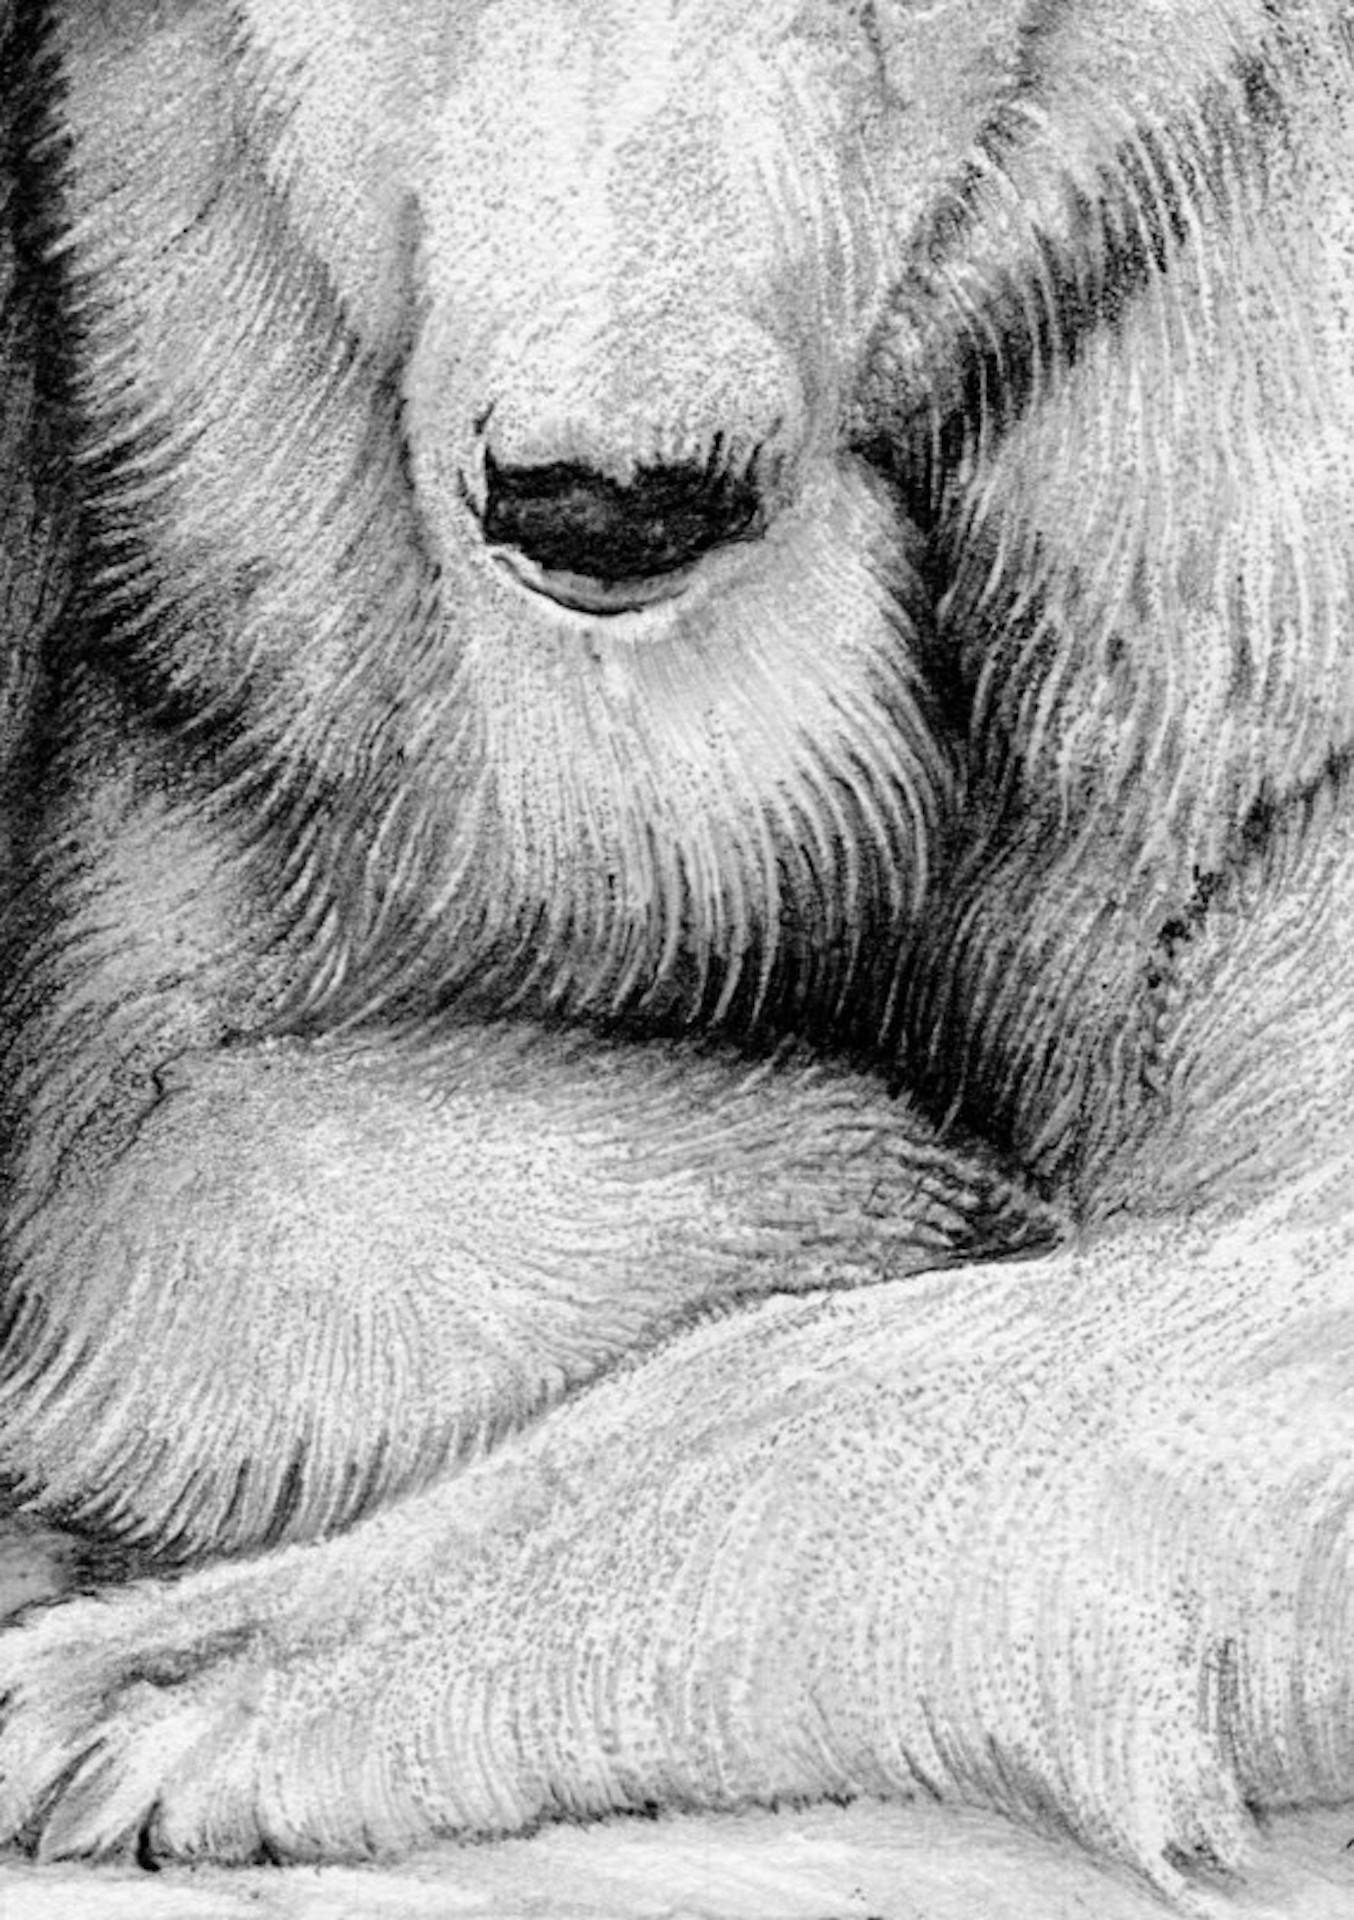 Polar Bear Family [2017]
Original
Figurative
Graphite on paper
Image size: H:43.1 cm x W:30.5 cm
Complete Size of Unframed Work: H:43.1 cm x W:30.5 cm x D:0.2cm
Sold Unframed
Please note that insitu images are purely an indication of how a piece may